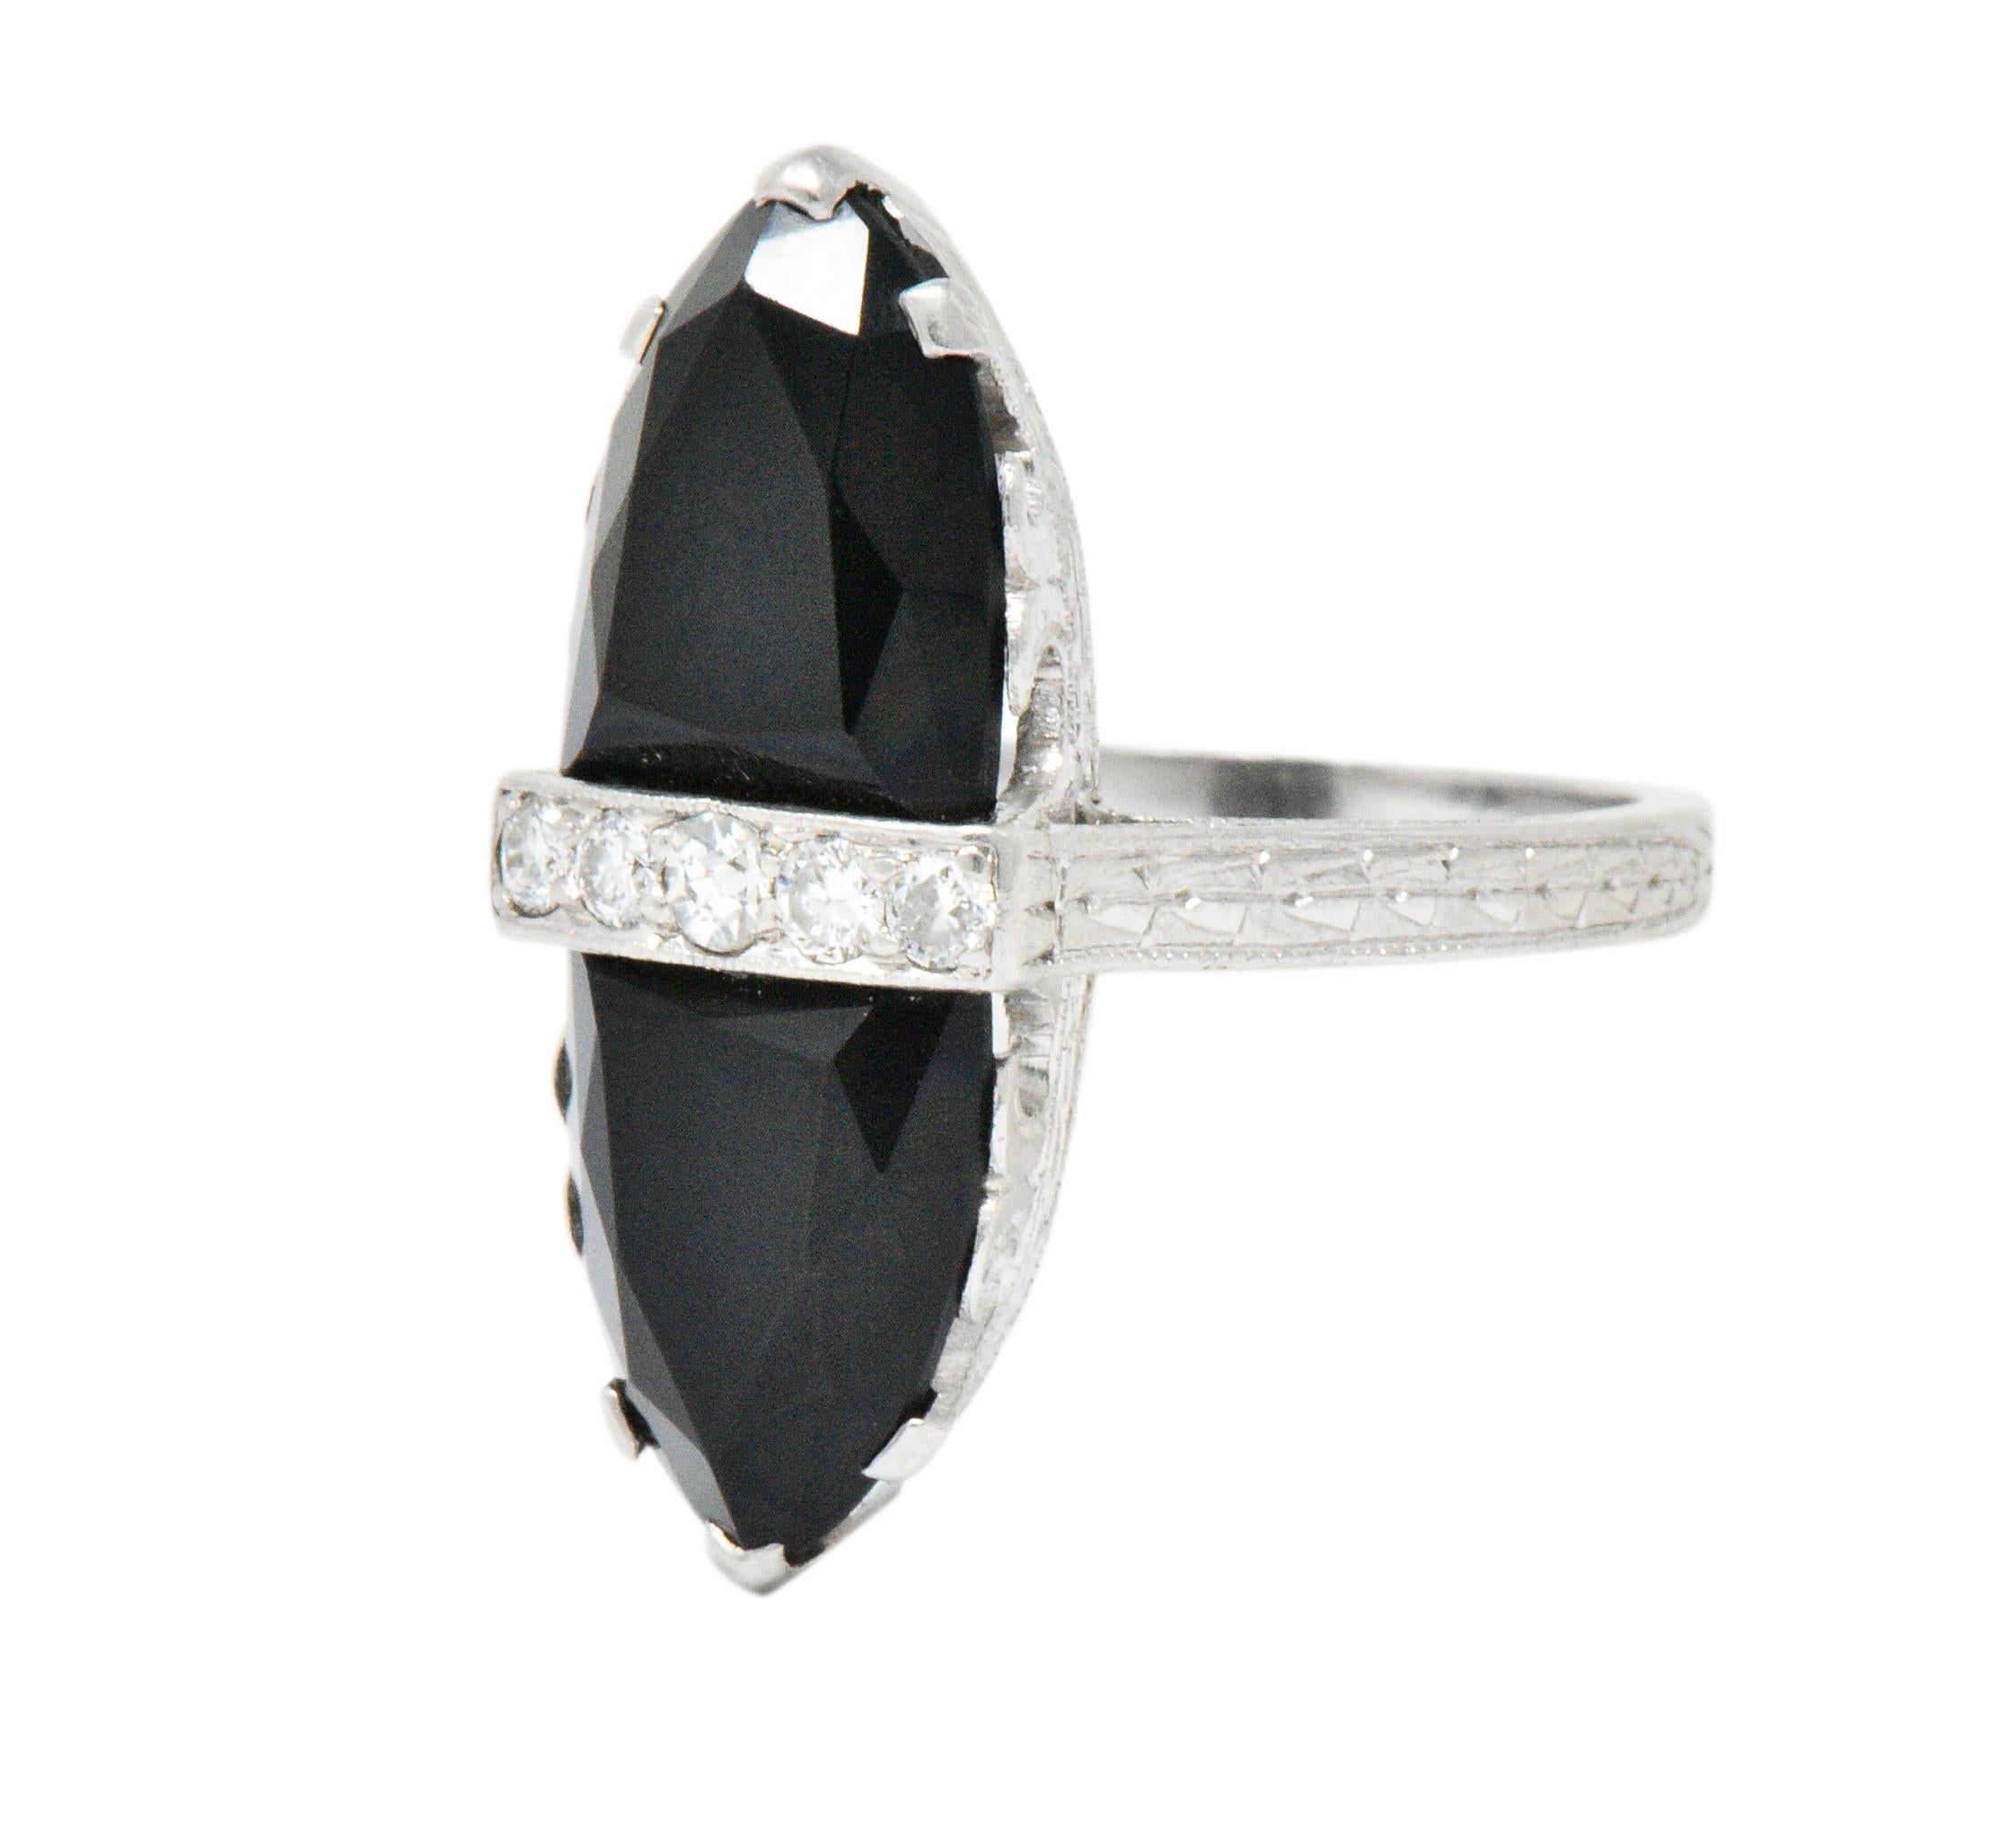 Centering 5 old European and single cut diamonds, weighing approximately 0.10 carat total, eye-clean and white 

With two faceted rounded triangle onyx measuring 9.6 x 7.4 x 2.5 mm, 9.2 x 7.6 x 2.6 mm, respectively

In a stunning scrolling